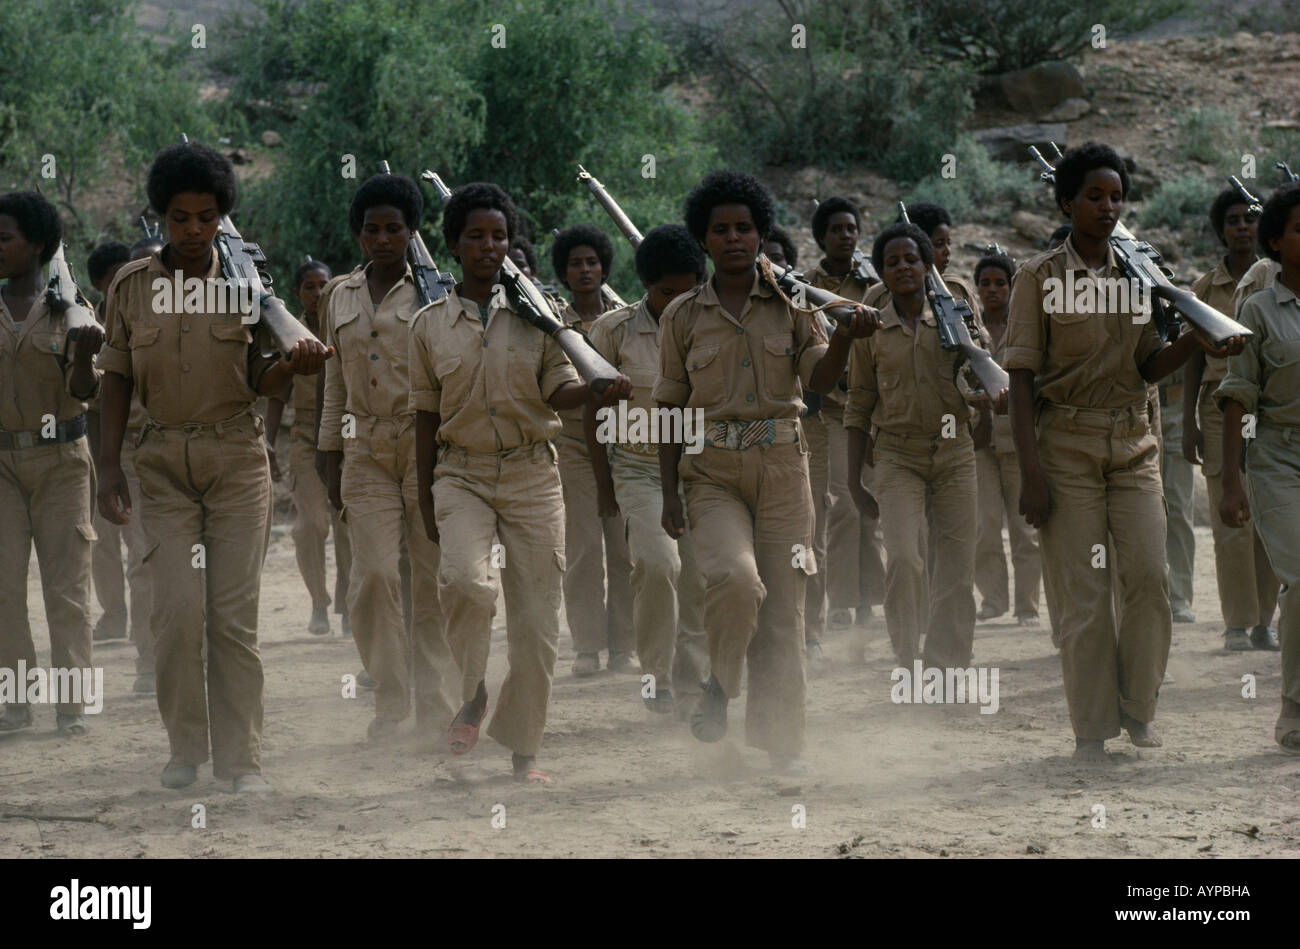 ERITREA Horn Of Africa Military Eritrean People's Liberation Front female guerrilla soldiers training Stock Photo